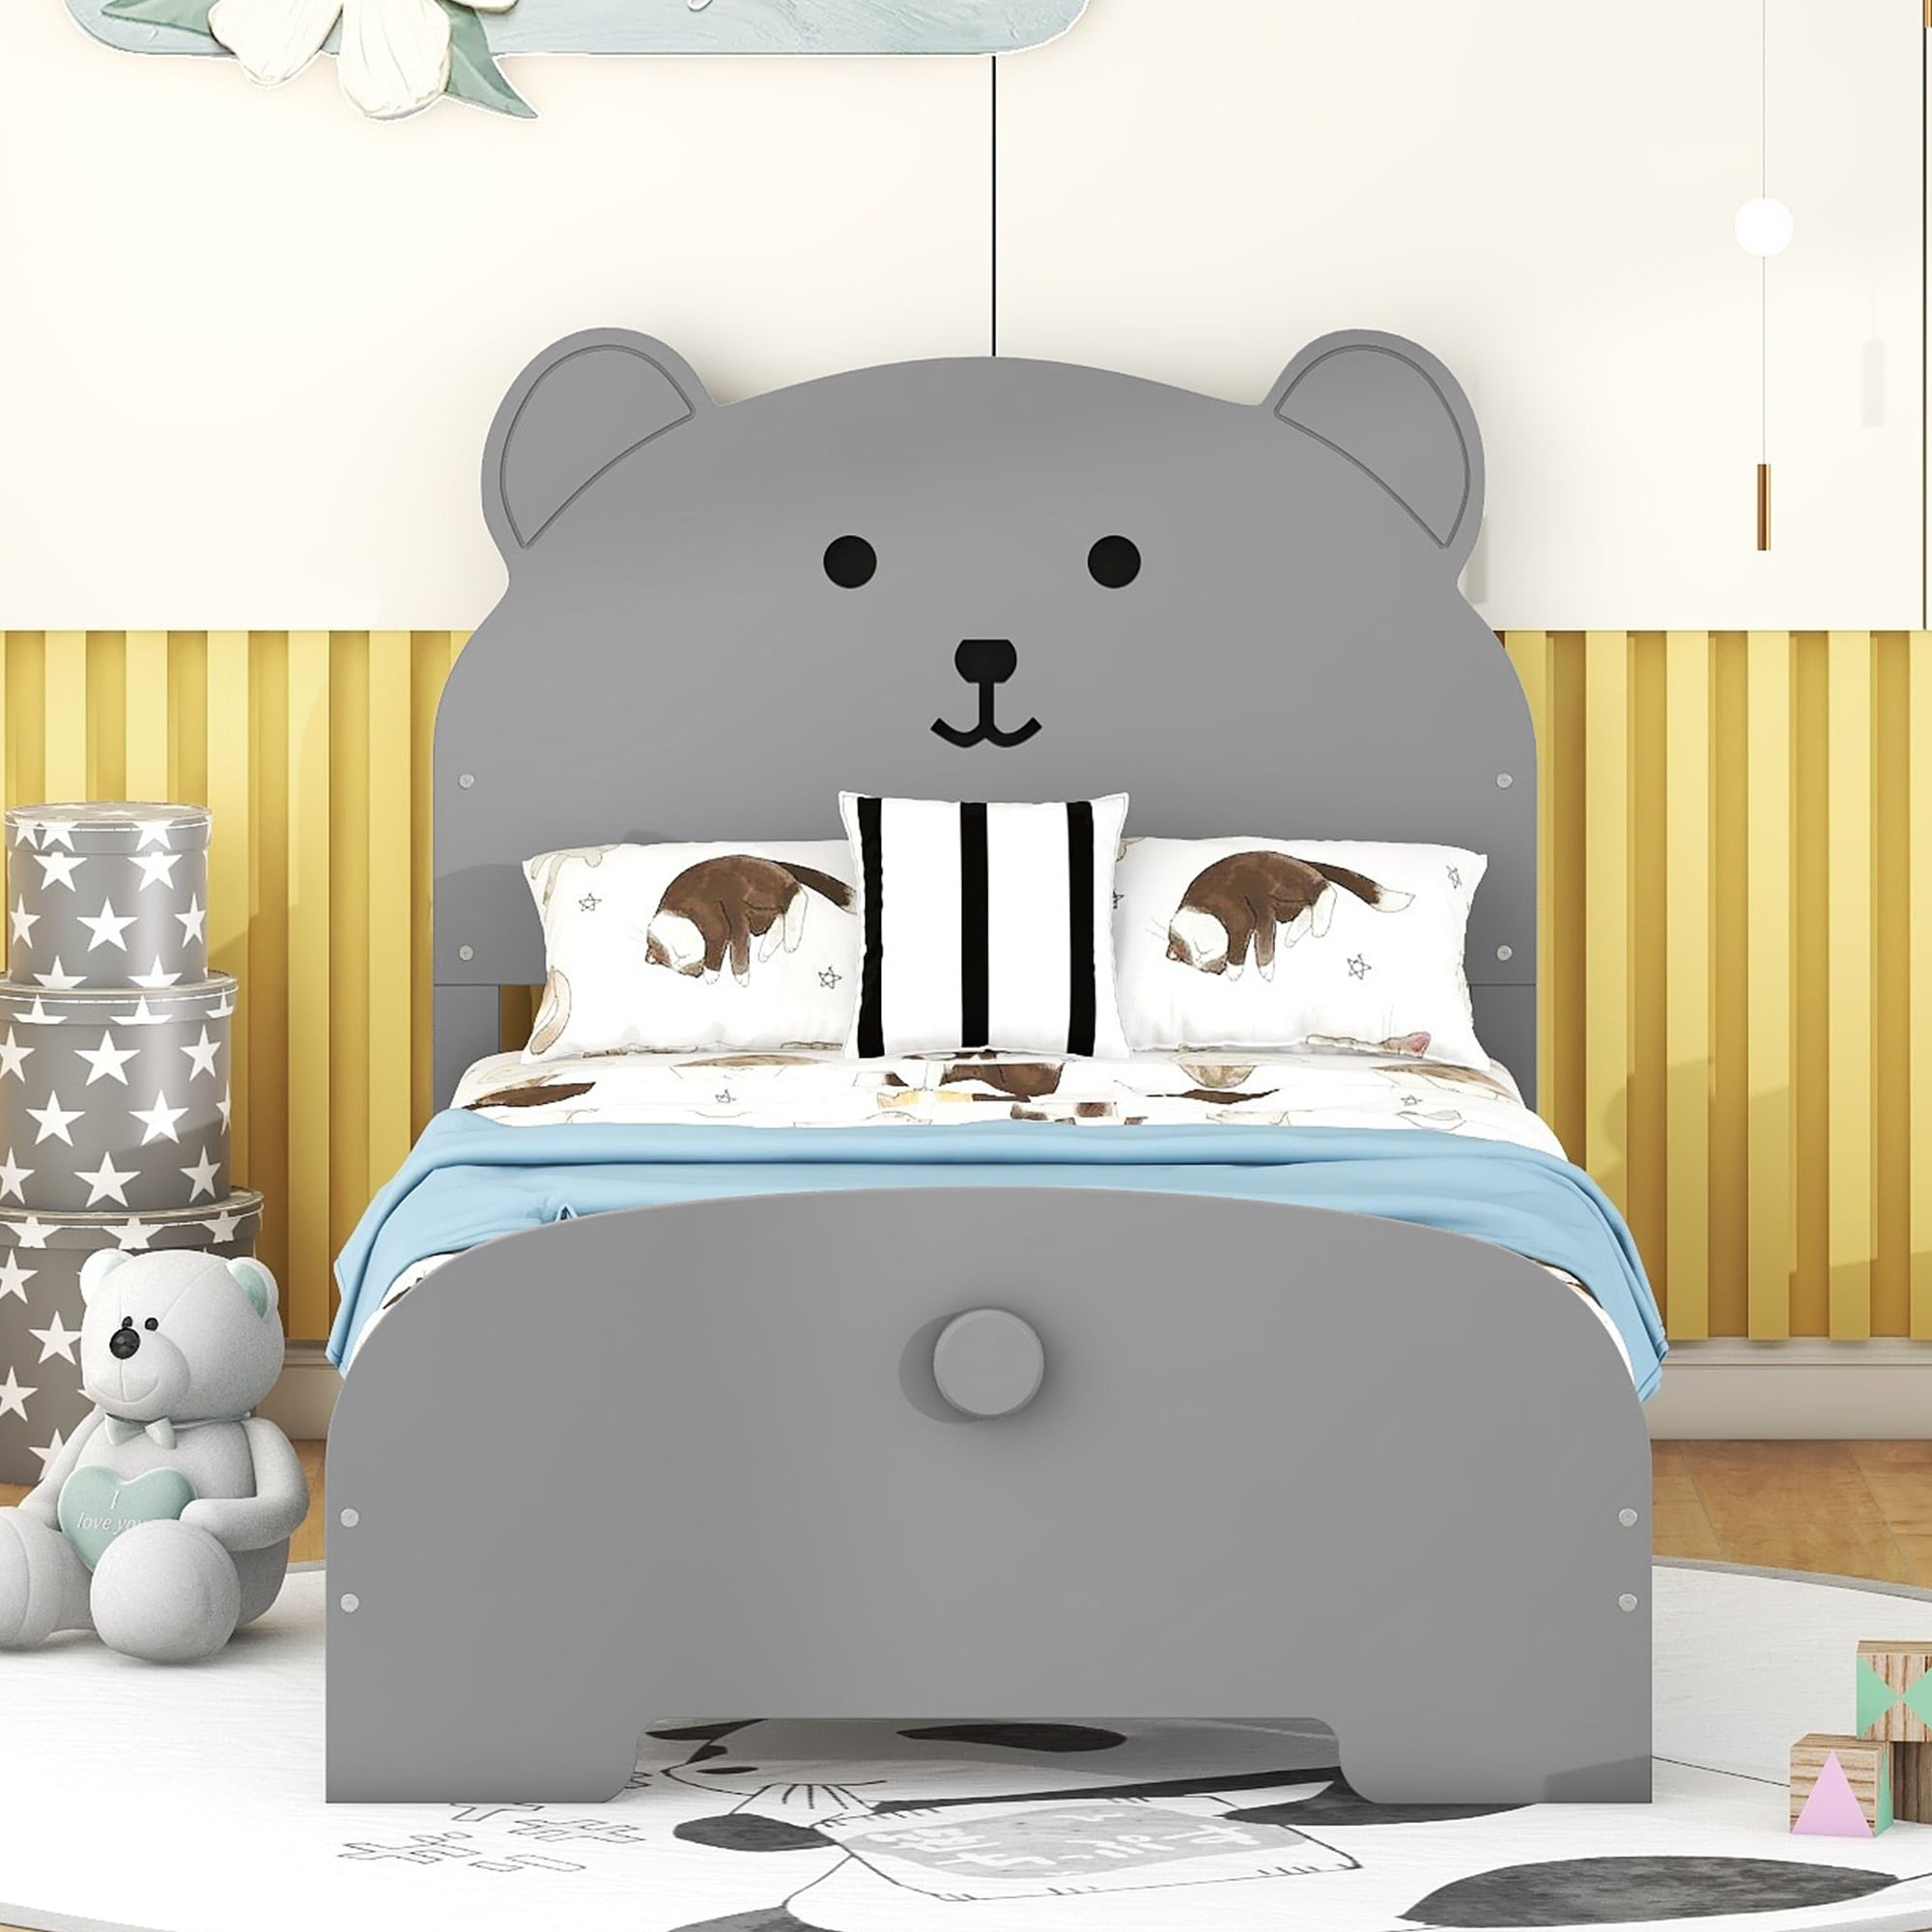 Twin Size Wood Platform Bed With Bear-shaped Headboard